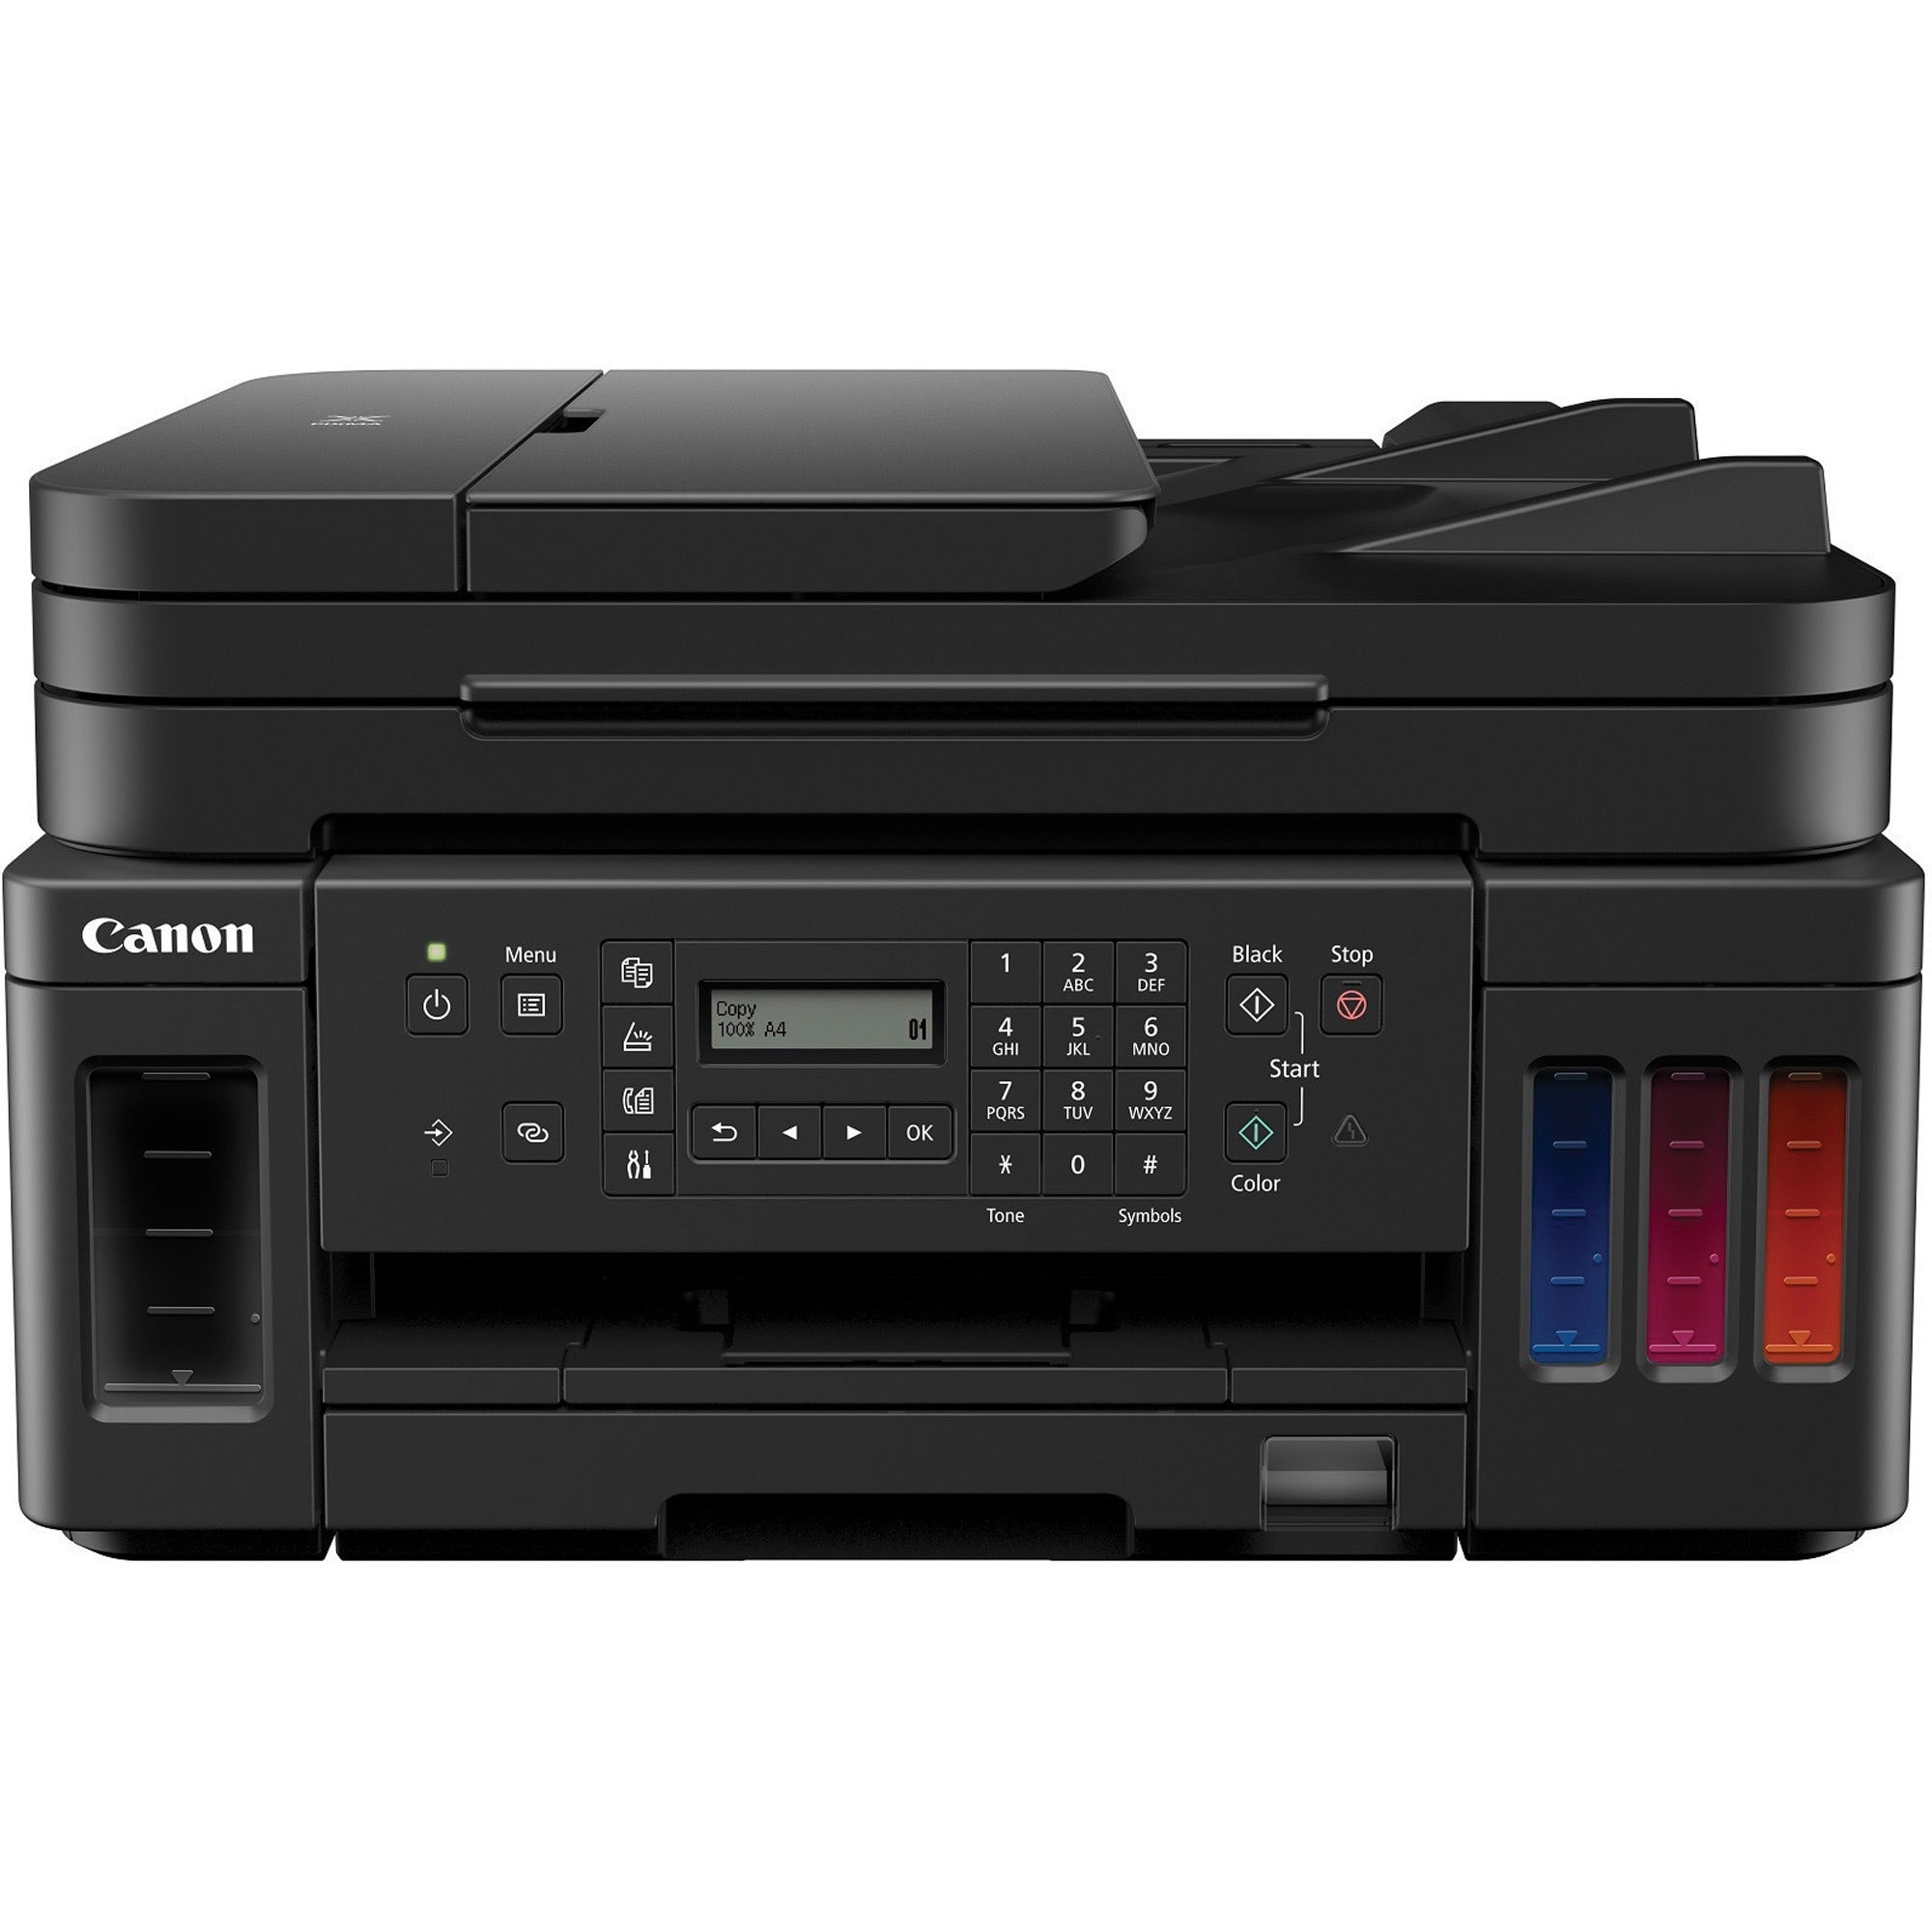 Canon PIXMA G7020 Wireless Inkjet Multifunction Printer - Color - Copier/Fax/Printer/Scanner - 4800 x 1200 dpi Print - Automatic Duplex Print - Up to 5000 Pages Monthly - 350 sheets Input - Color Scanner - 1200 dpi Optical Scan - Color Fax - Fast Eth - 1